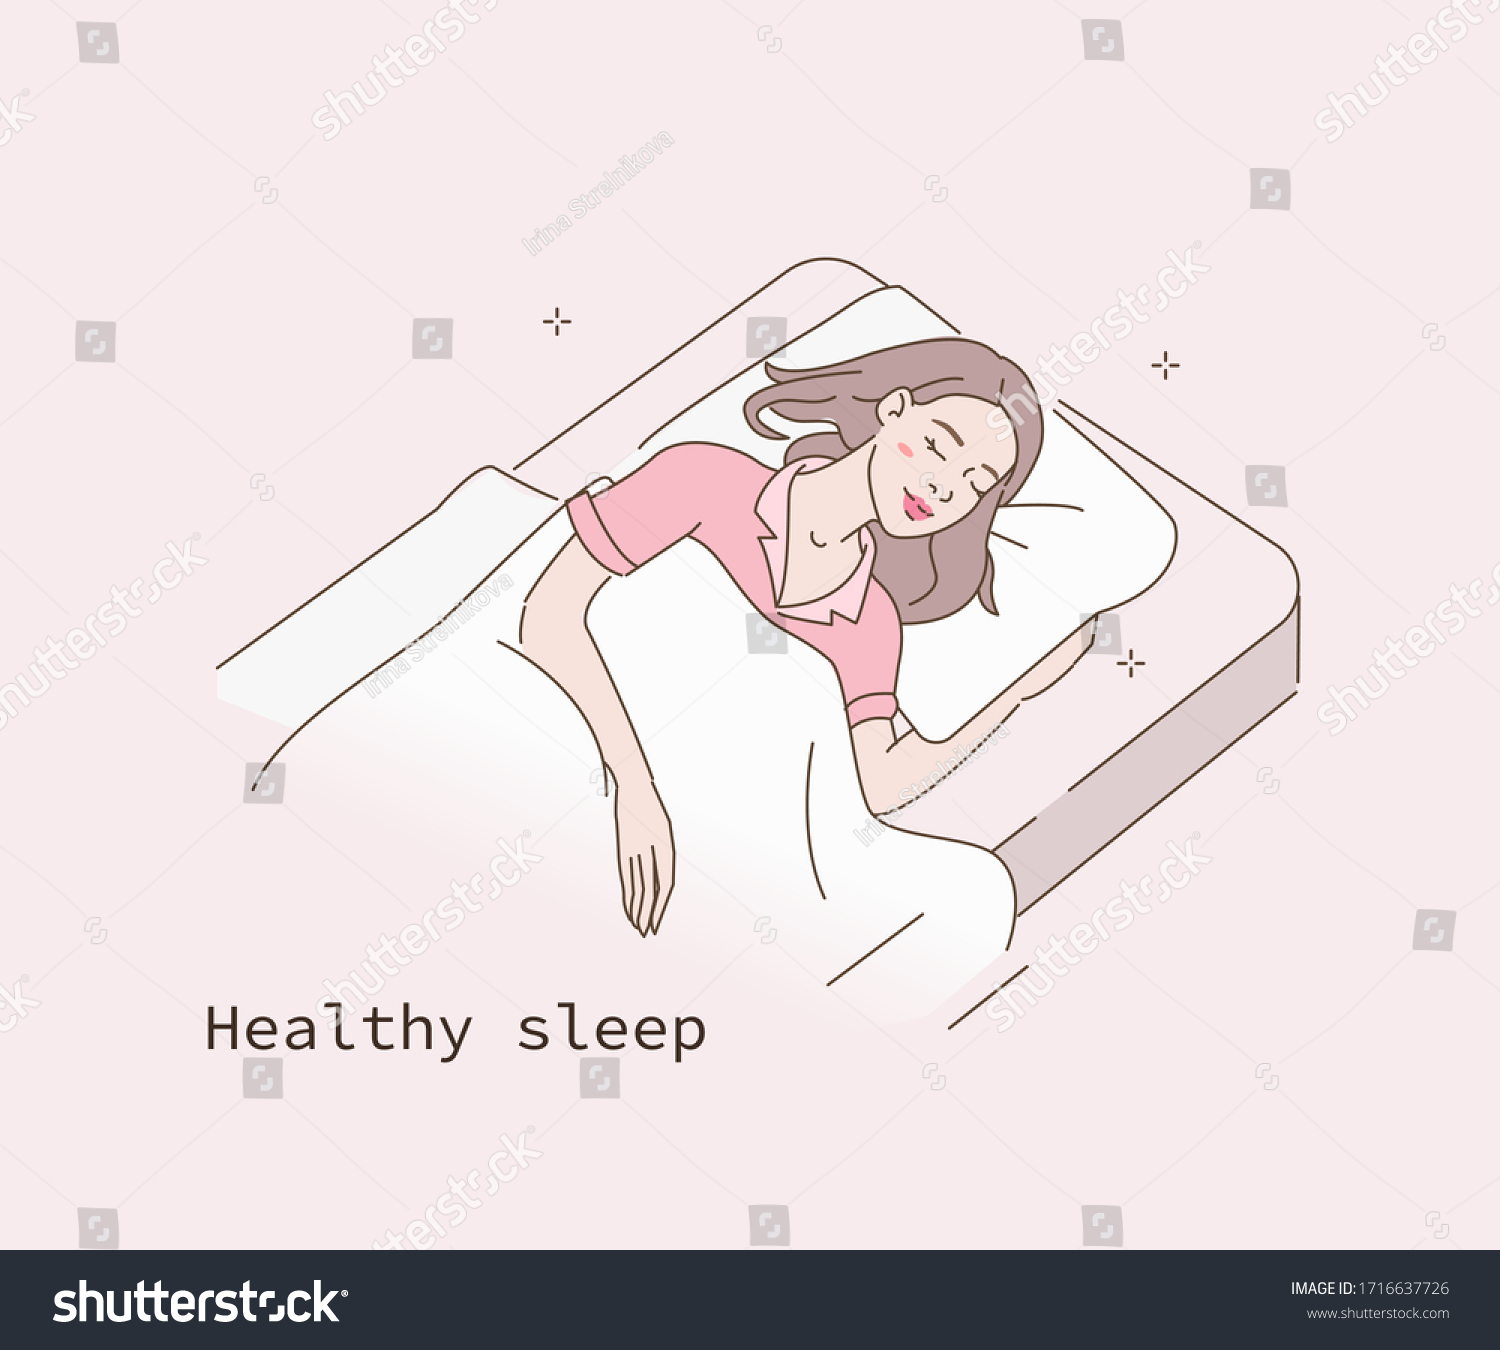 SVG of Beauty Woman Sleeping in Comfortable Bed on Soft Pillow at Home. Girl  Wearing Pajama Relaxing and Dreaming in Cozy Bed. Healthy Sleep  and Relaxation Concept. Flat Cartoon Vector Illustration. svg